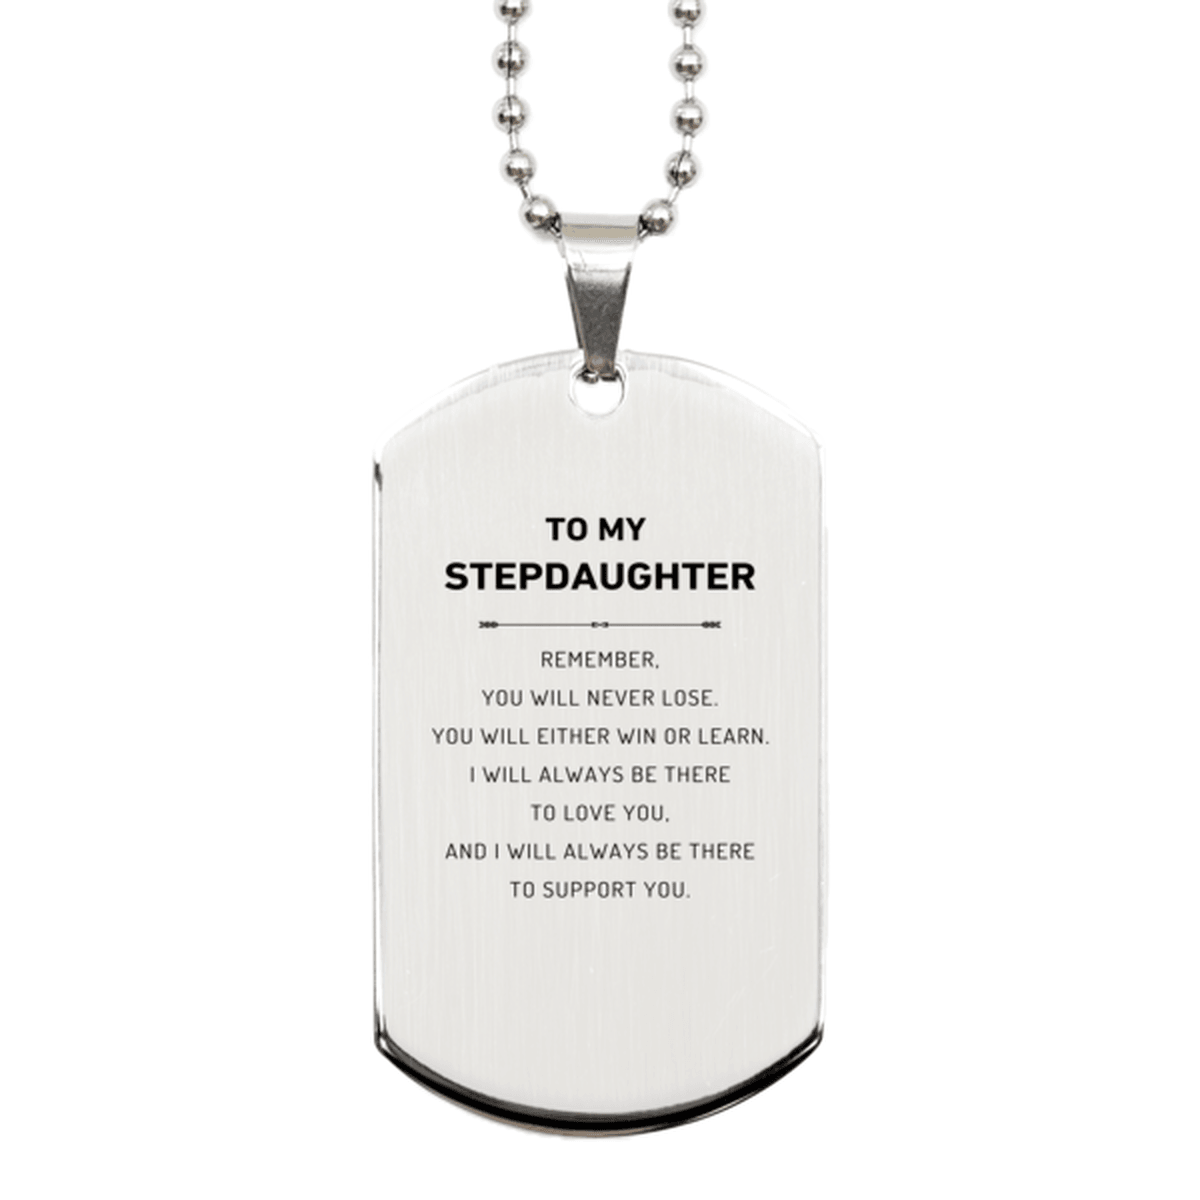 Stepdaughter Gifts, To My Stepdaughter Remember, you will never lose. You will either WIN or LEARN, Keepsake Silver Dog Tag For Stepdaughter Engraved, Birthday Christmas Gifts Ideas For Stepdaughter X-mas Gifts